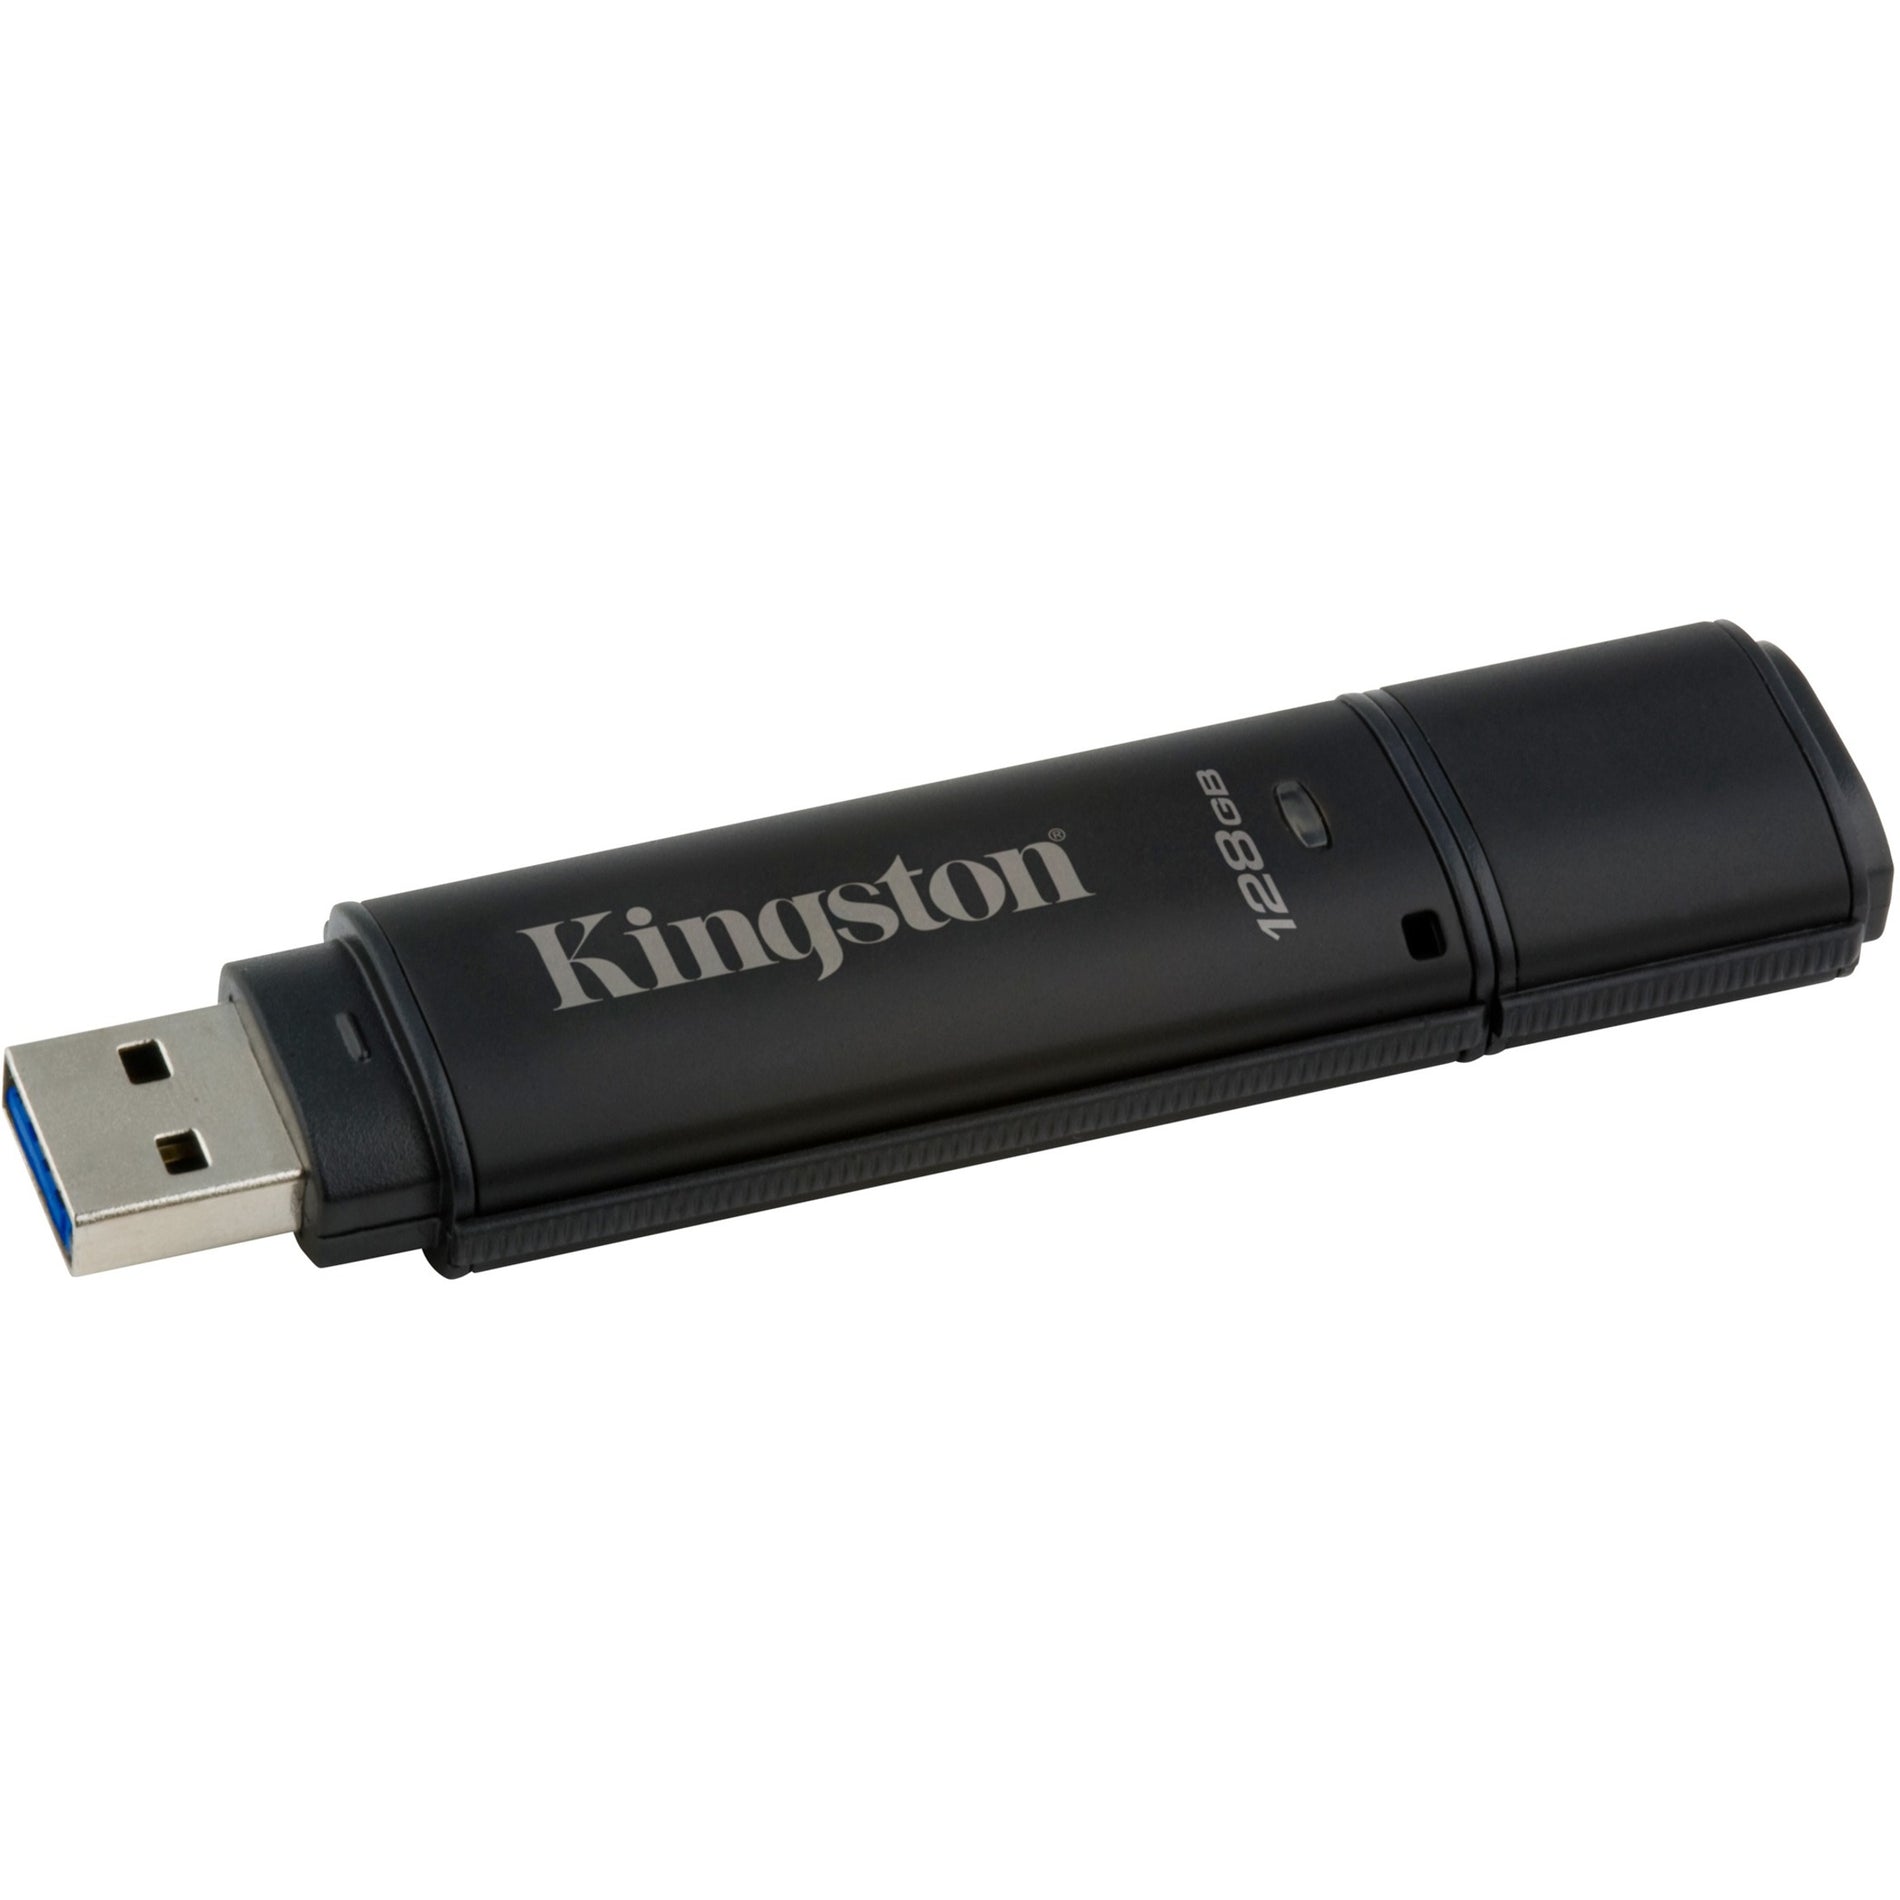 Kingston DT4000G2DM/128GB DT4000G2 ENCRYPTED USB FLASH, 128GB, Water Proof, Auto-locking, Password Protection, Hardware Encryption